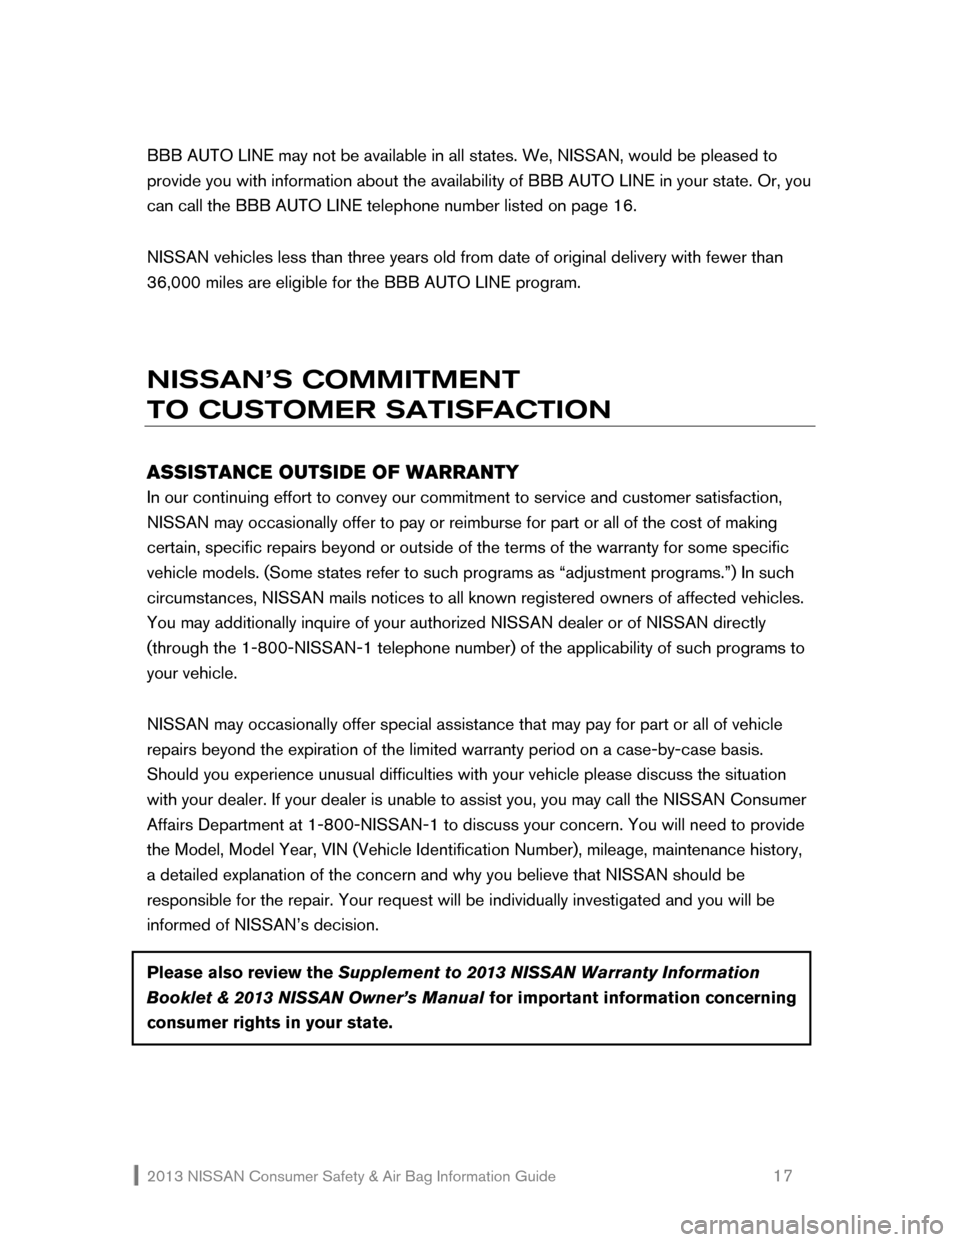 NISSAN TITAN 2013 1.G Consumer Safety Air Bag Information Guide 2013 NISSAN Consumer Safety & Air Bag Information Guide                                                   17 
BBB AUTO LINE may not be available in all states. We, NISSAN, would be pleased to 
provide